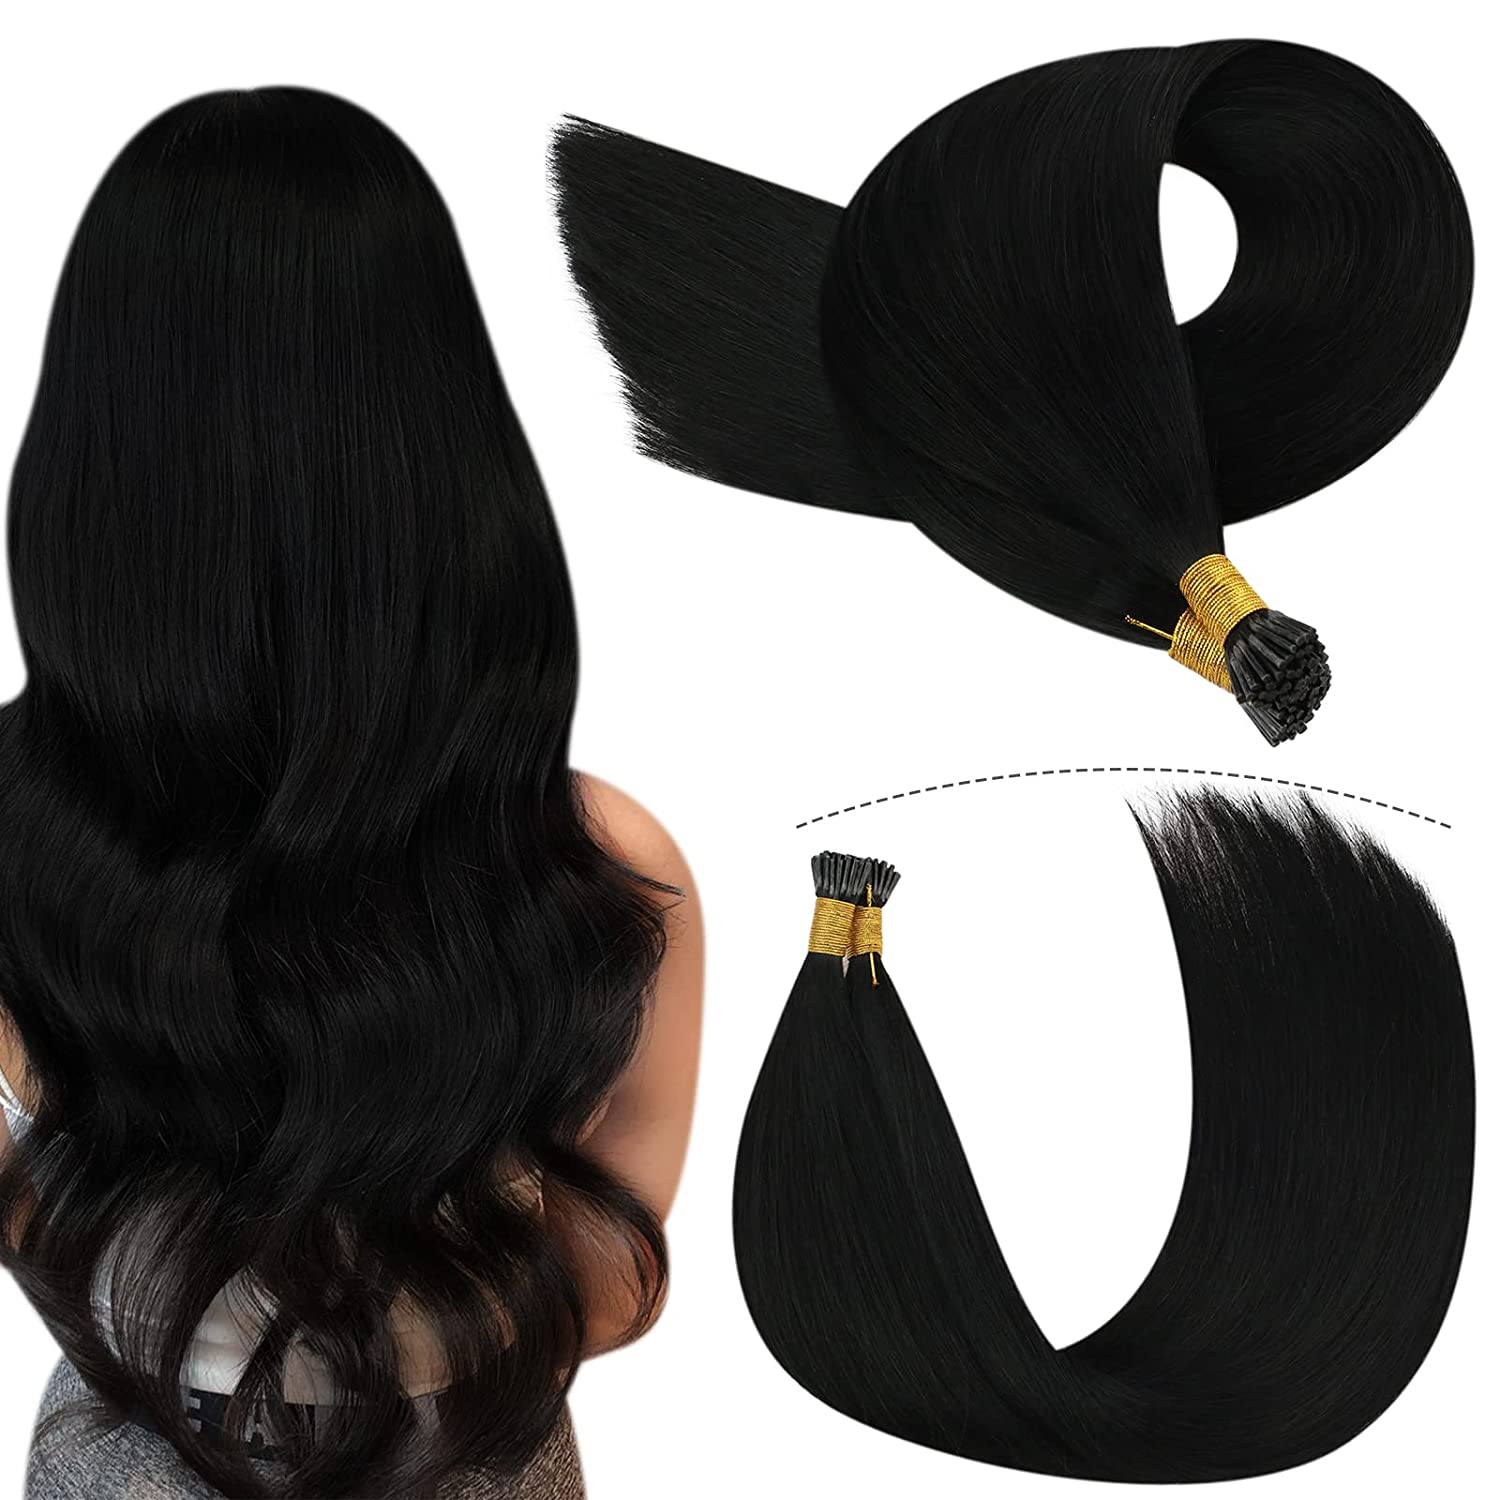 [Buy 1 Get 1 Free] I Tip Remy Human Hair Extensions Keratin Tip Jet Black #1 |Youngsee